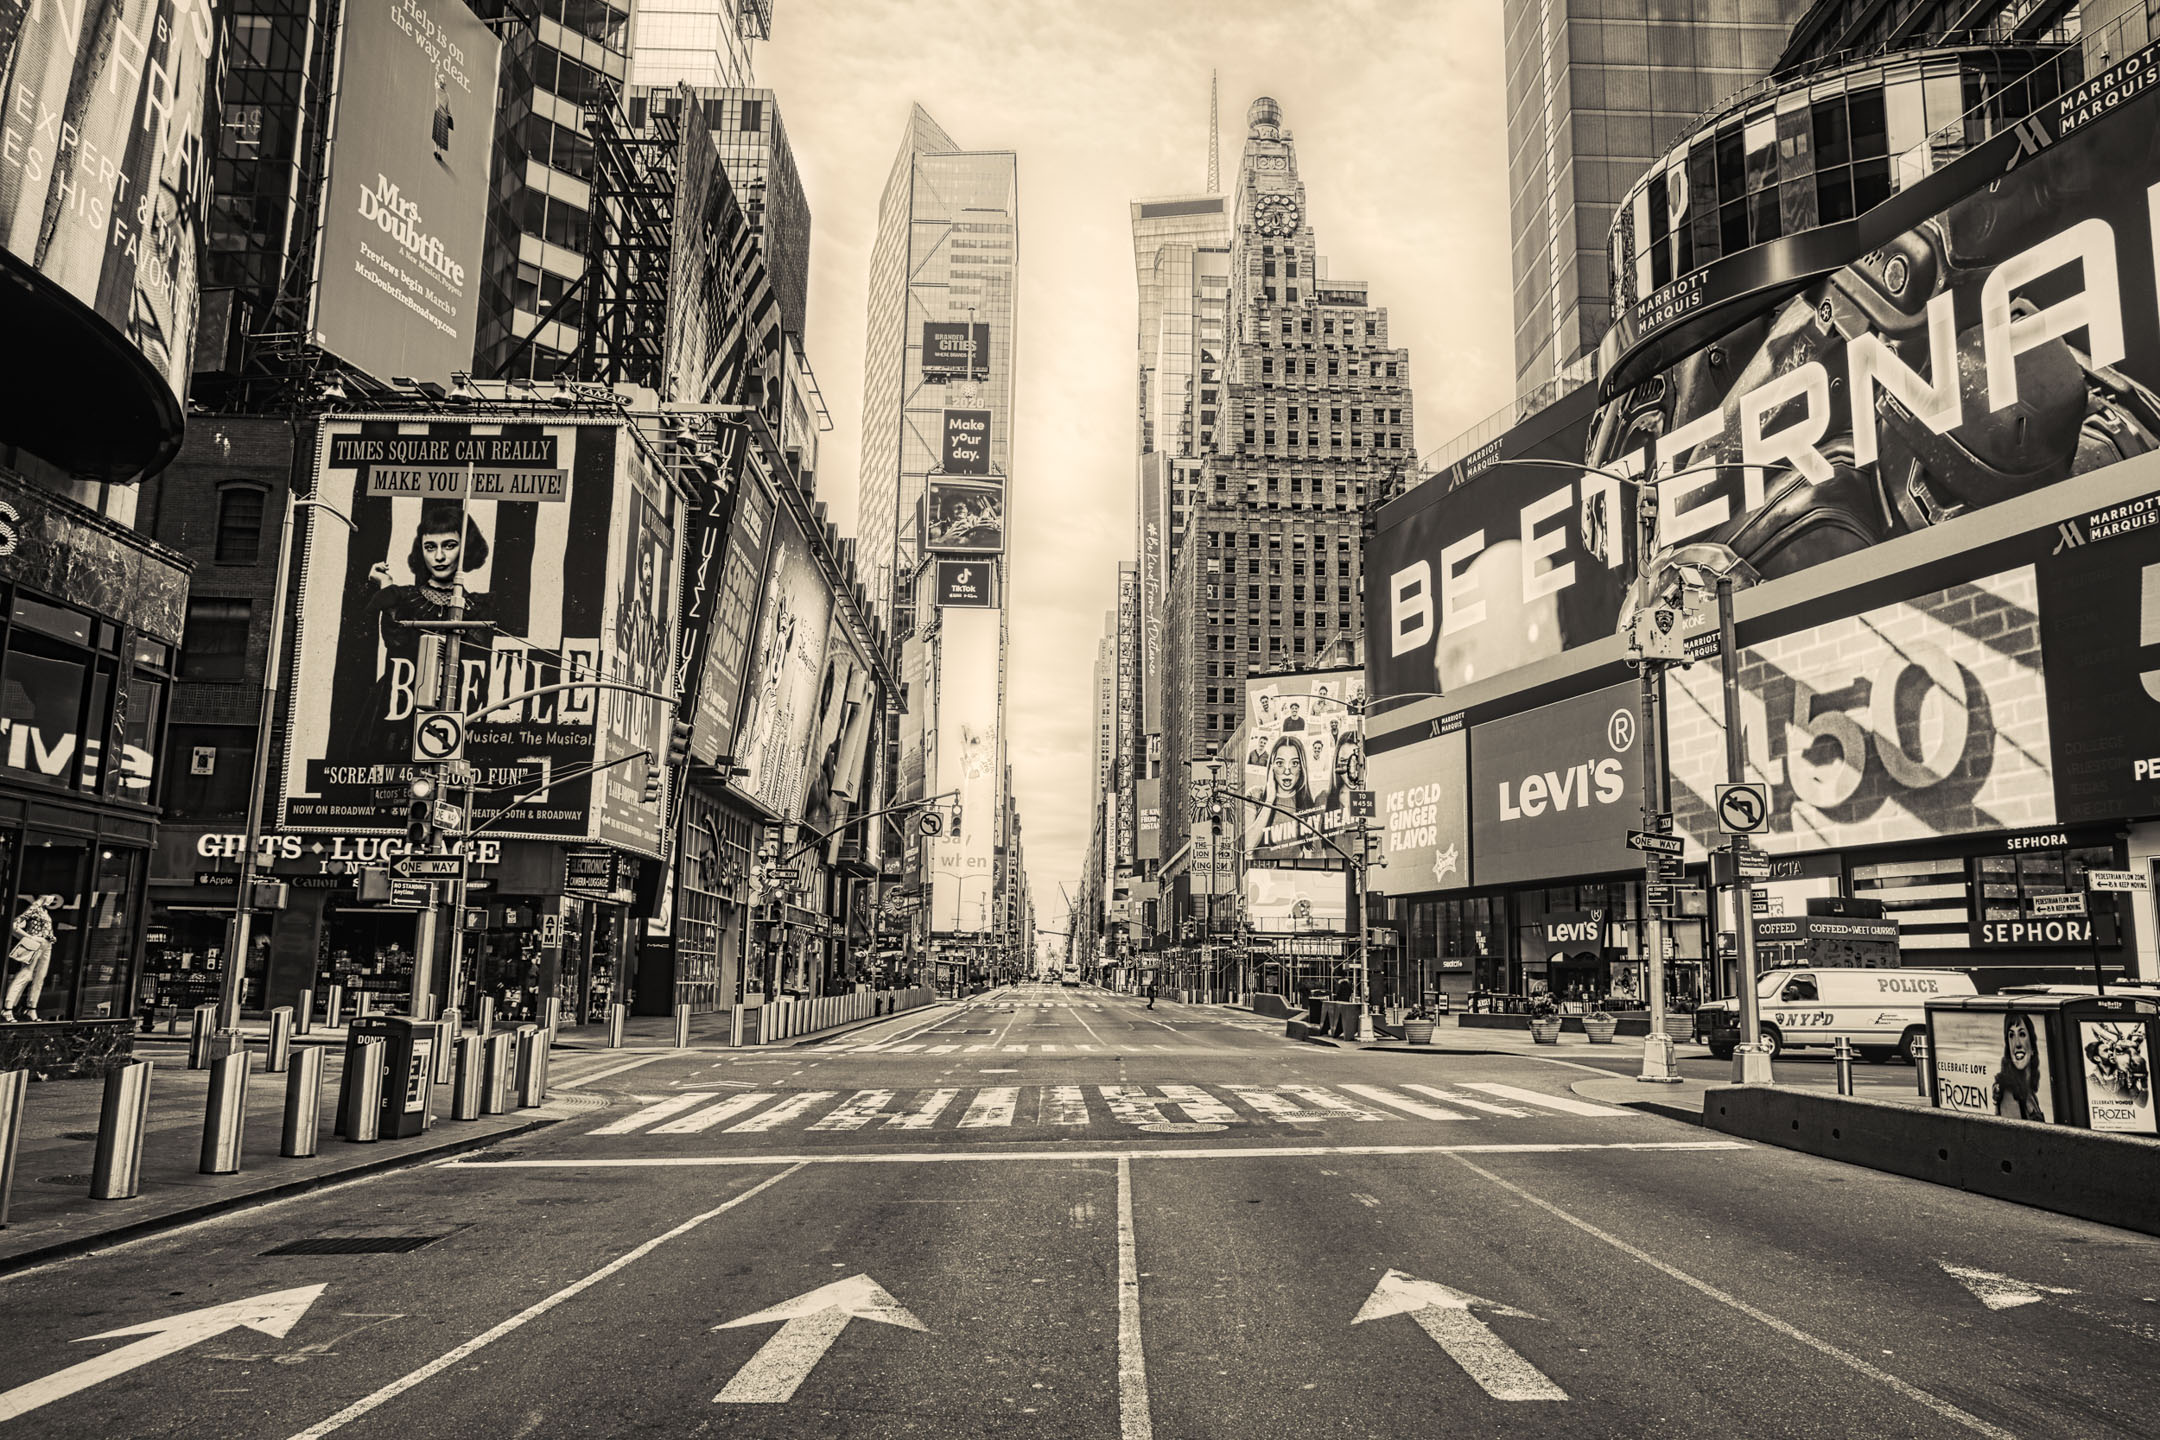 The nearly empty streets of New York City because of the coronavirus pandemic.